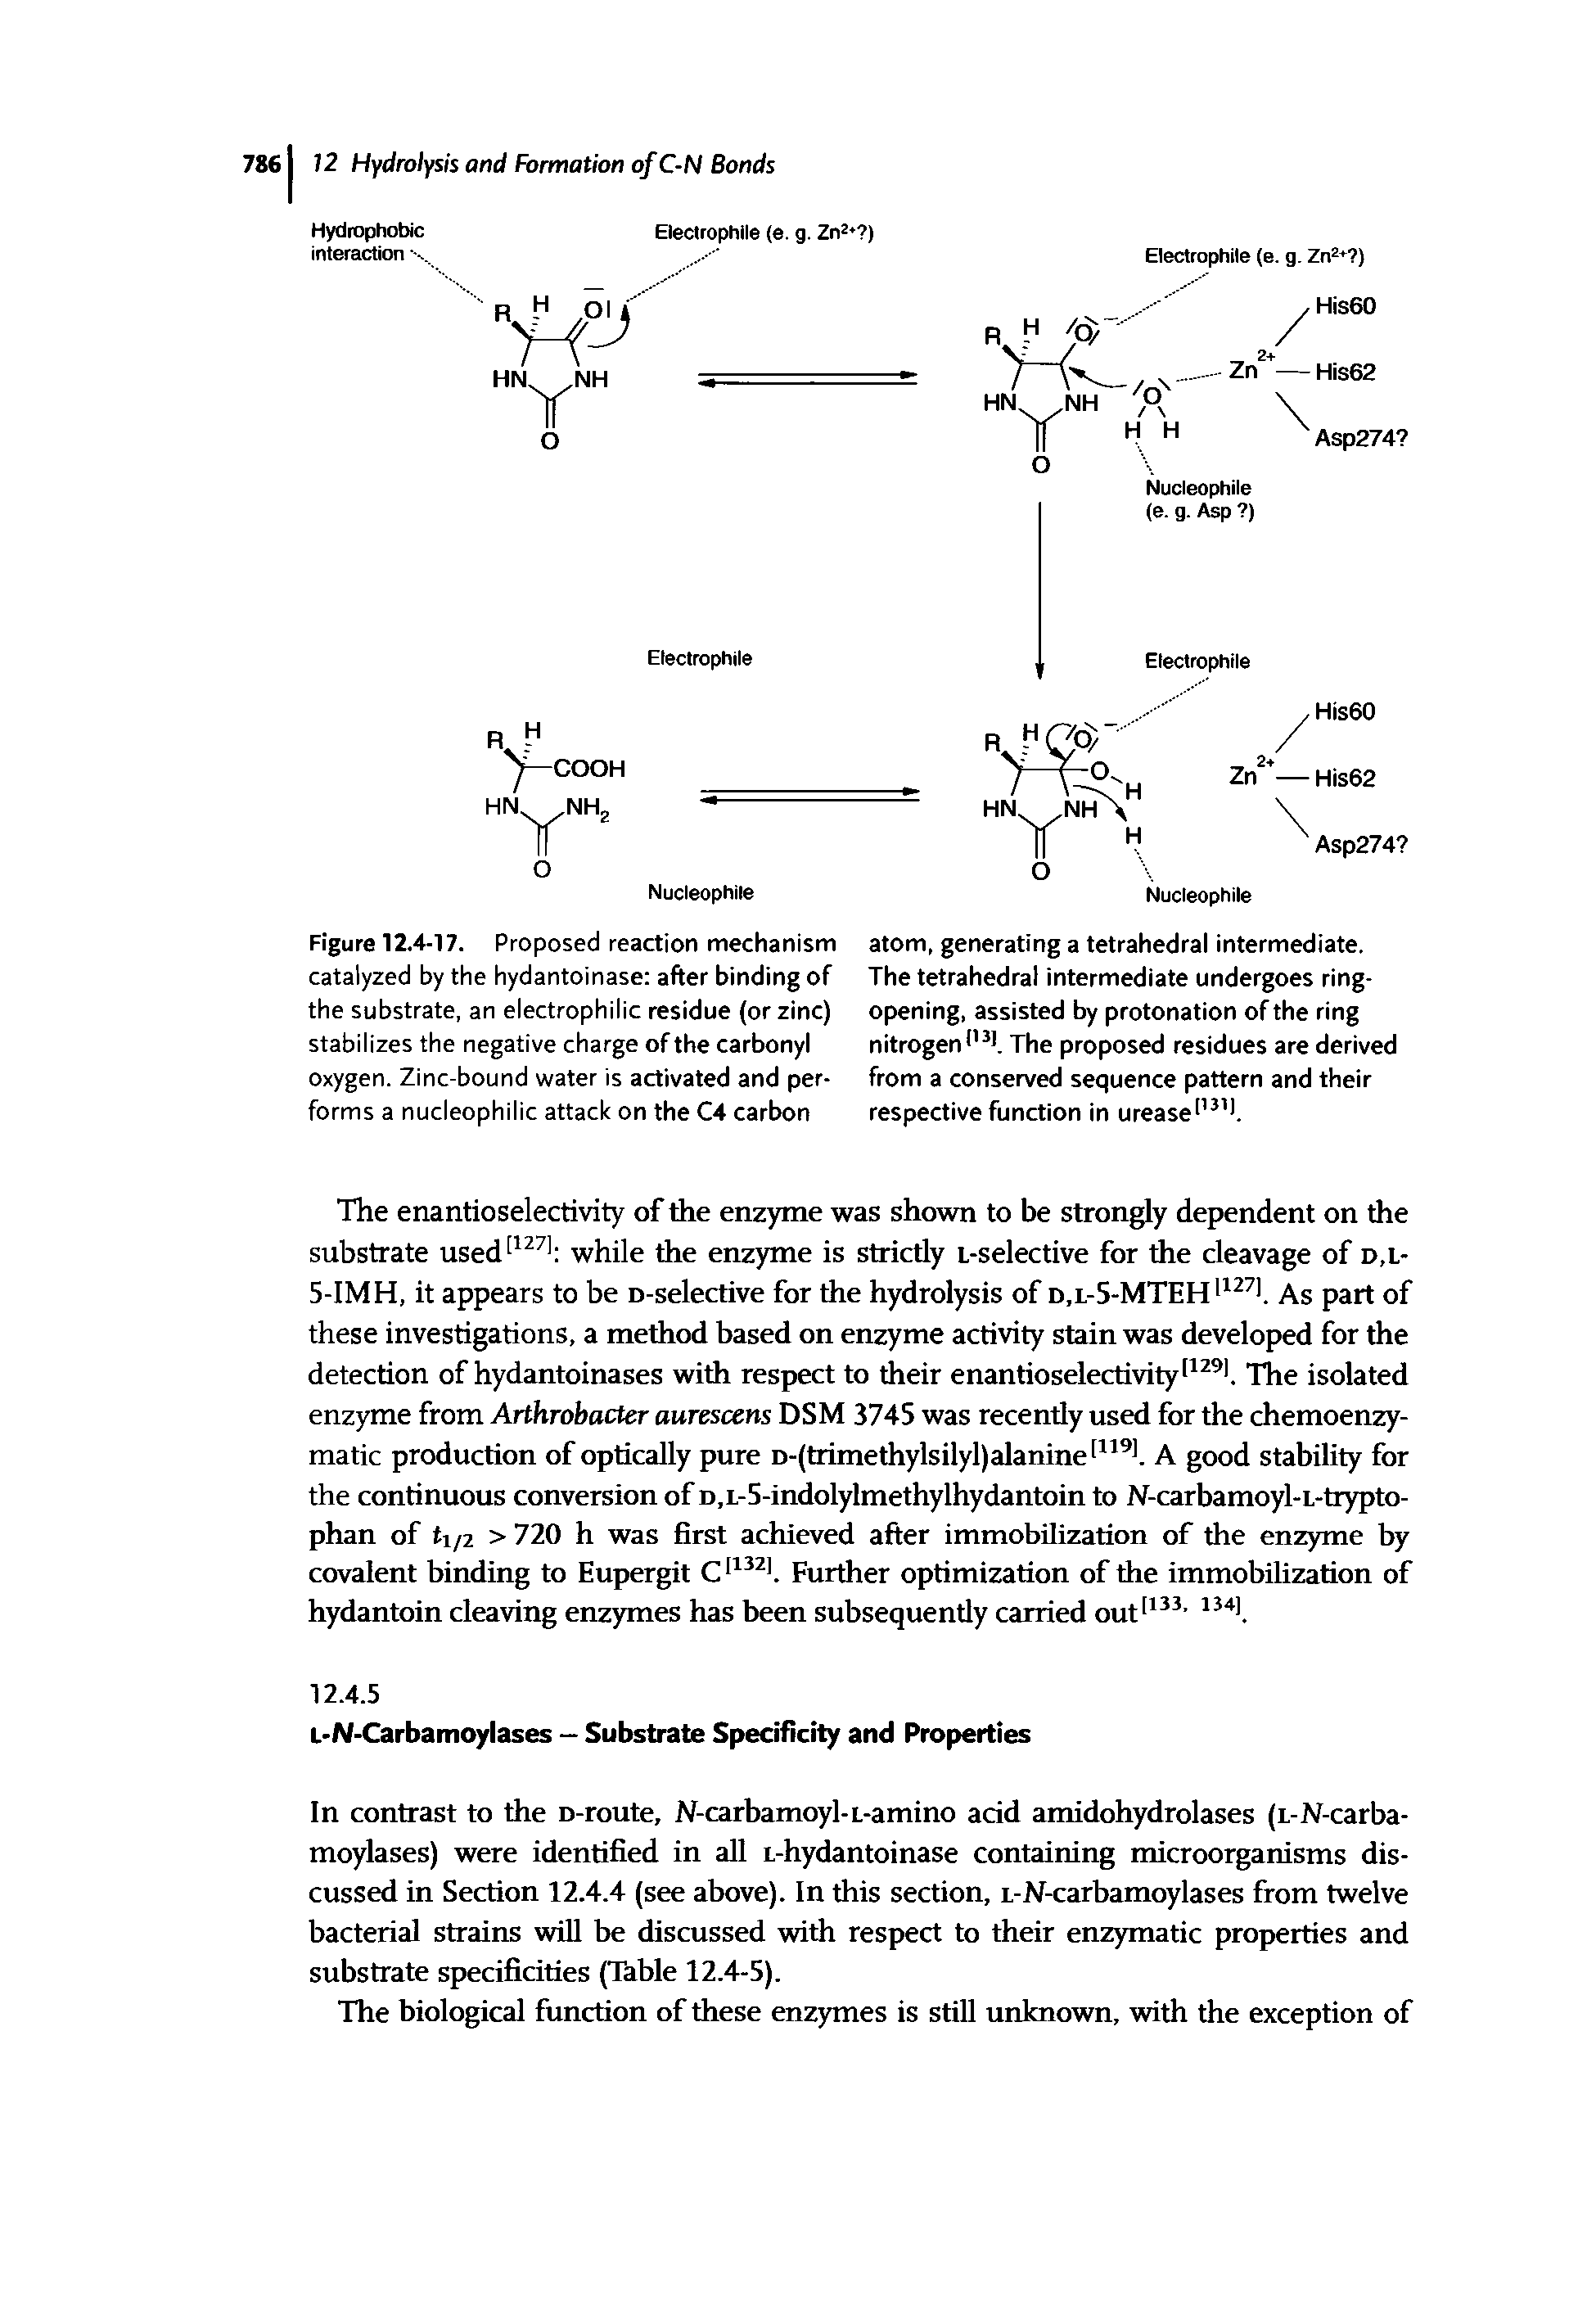 Figure 12.4-17. Proposed reaction mechanism catalyzed by the hydantoinase after binding of the substrate, an electrophilic residue (or zinc) stabilizes the negative charge of the carbonyl oxygen. Zinc-bound water is activated and performs a nucleophilic attack on the C4 carbon...